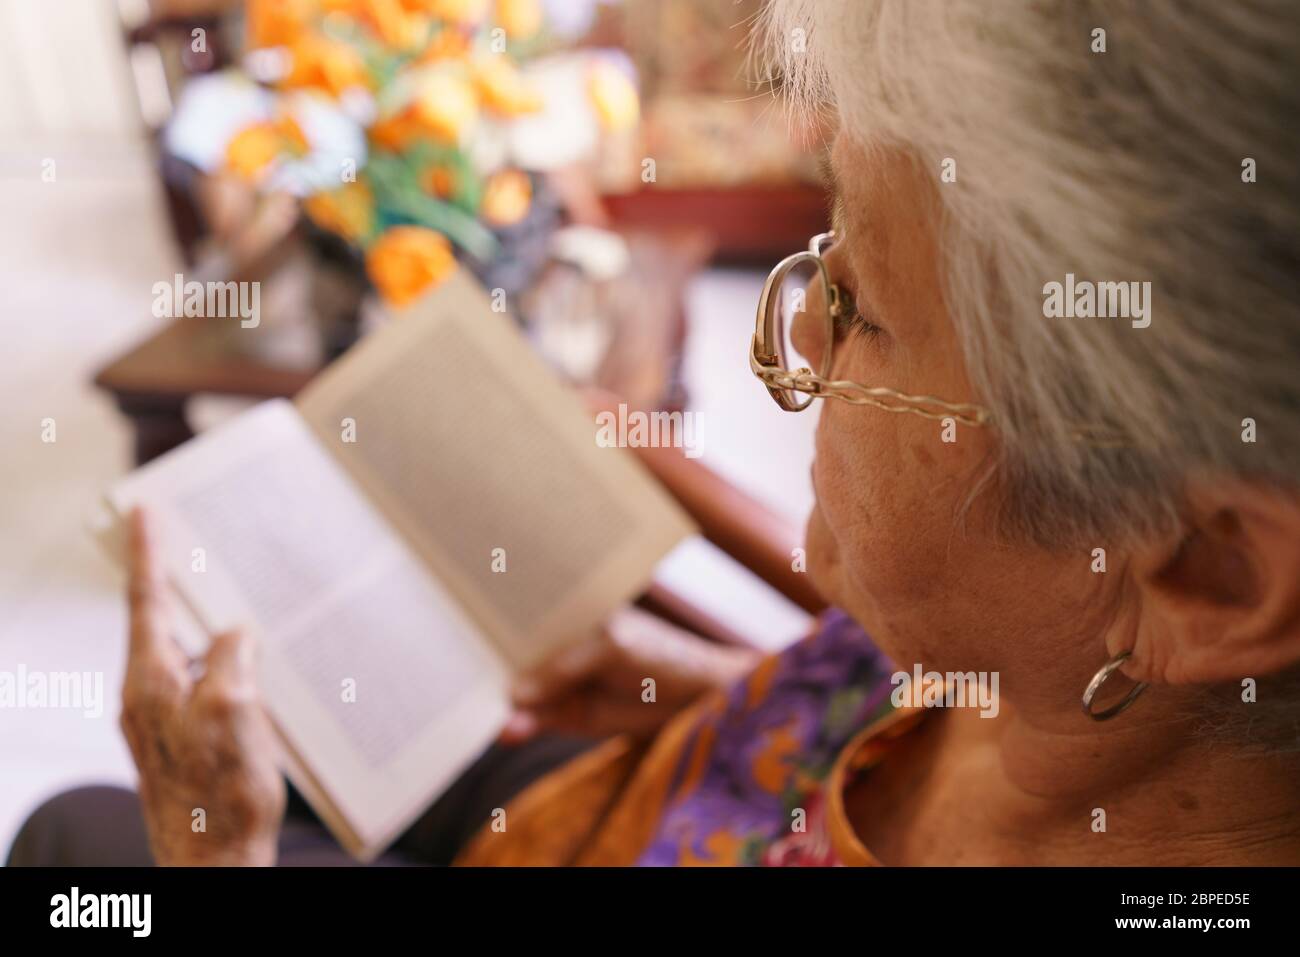 Old people in geriatric hospice: senior woman with eyeglasses and miopia problems sitting on chair and reading a book. Stock Photo